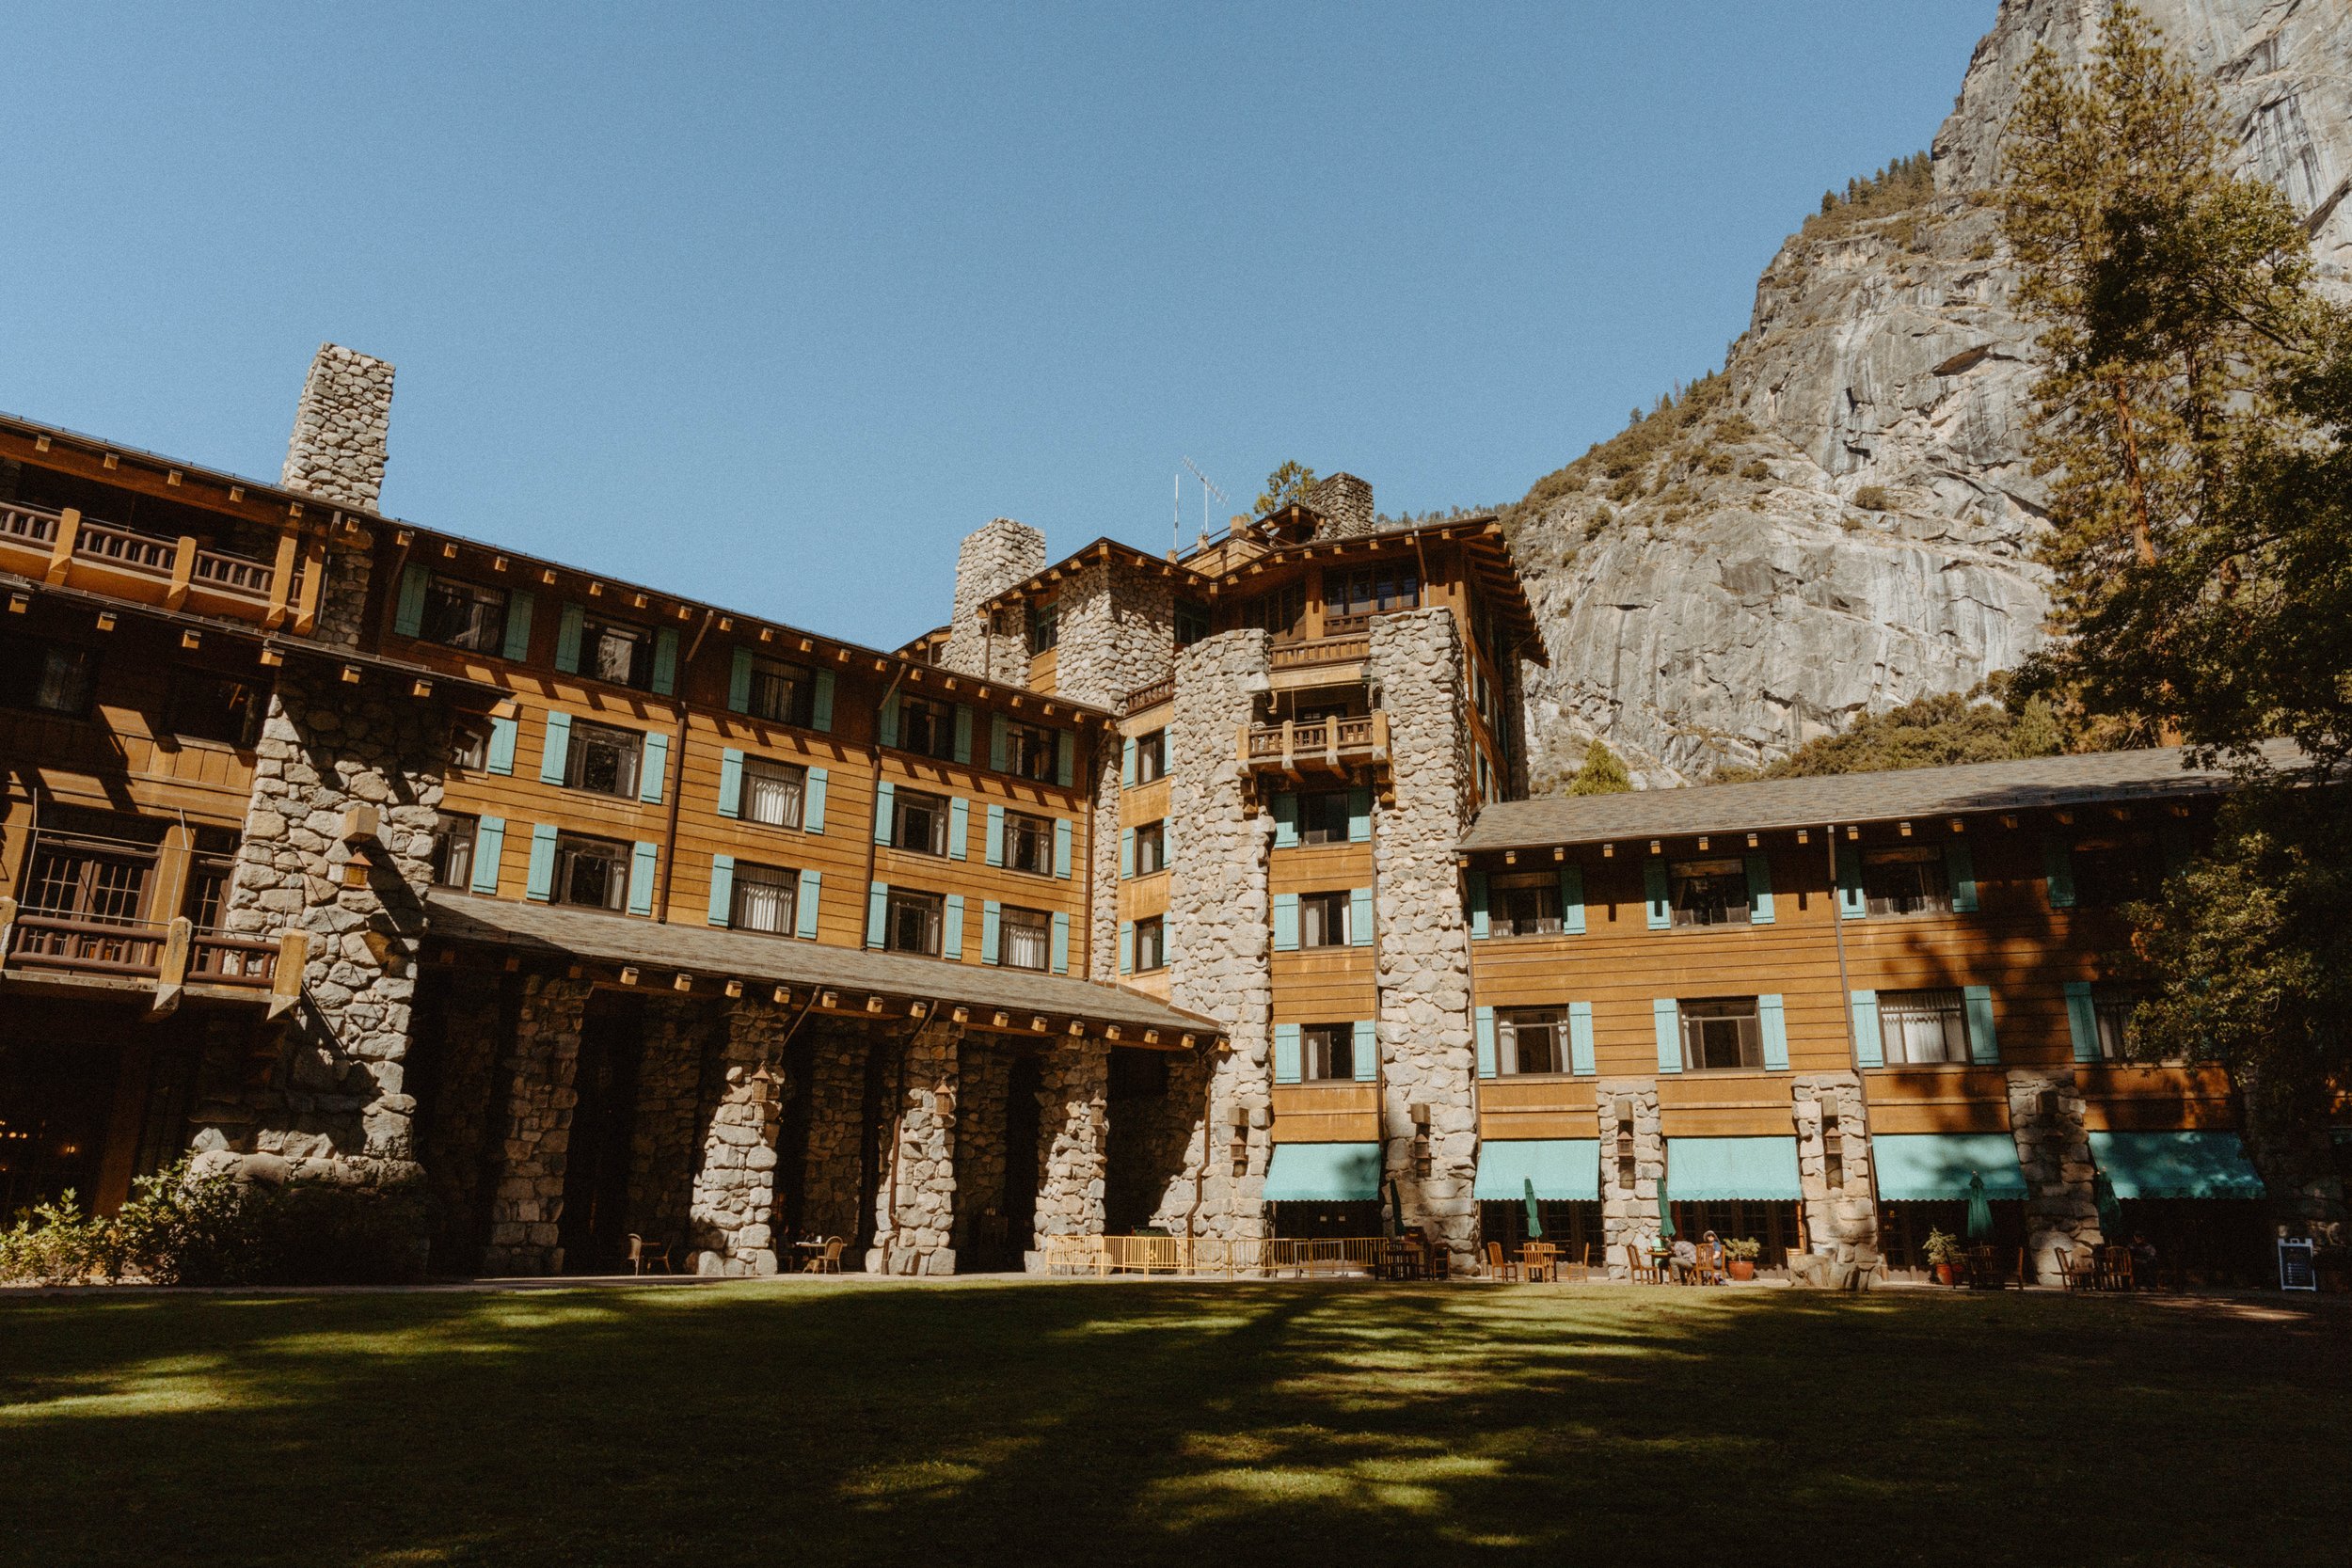 The Ahwahnee Hotel in Yosemite National Park